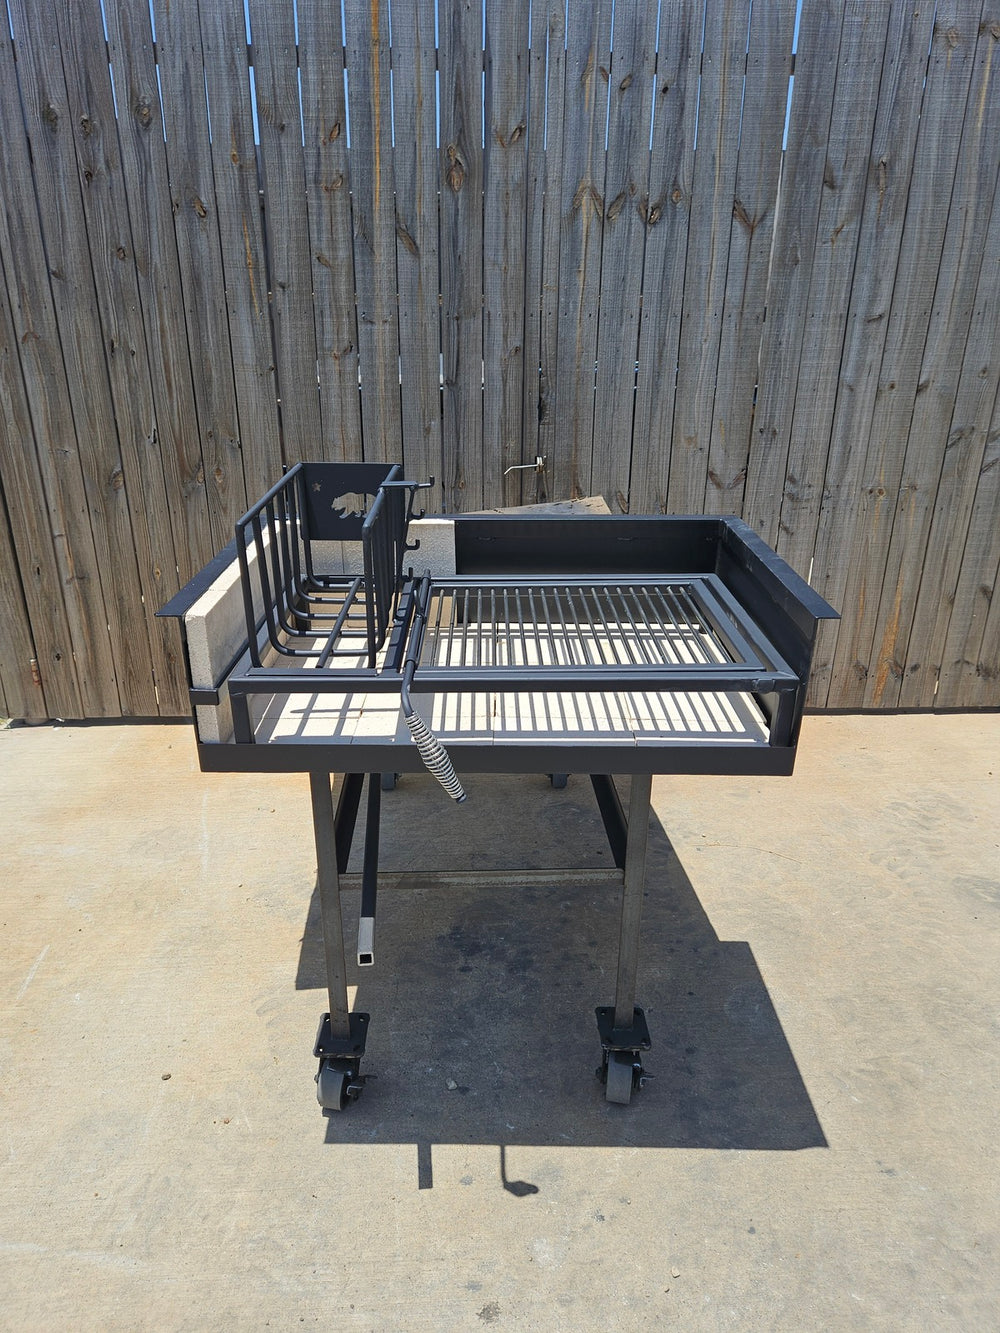 Built-in Uruguayan Grill with Side Brasero and Steel Firebox - Heritage Backyard